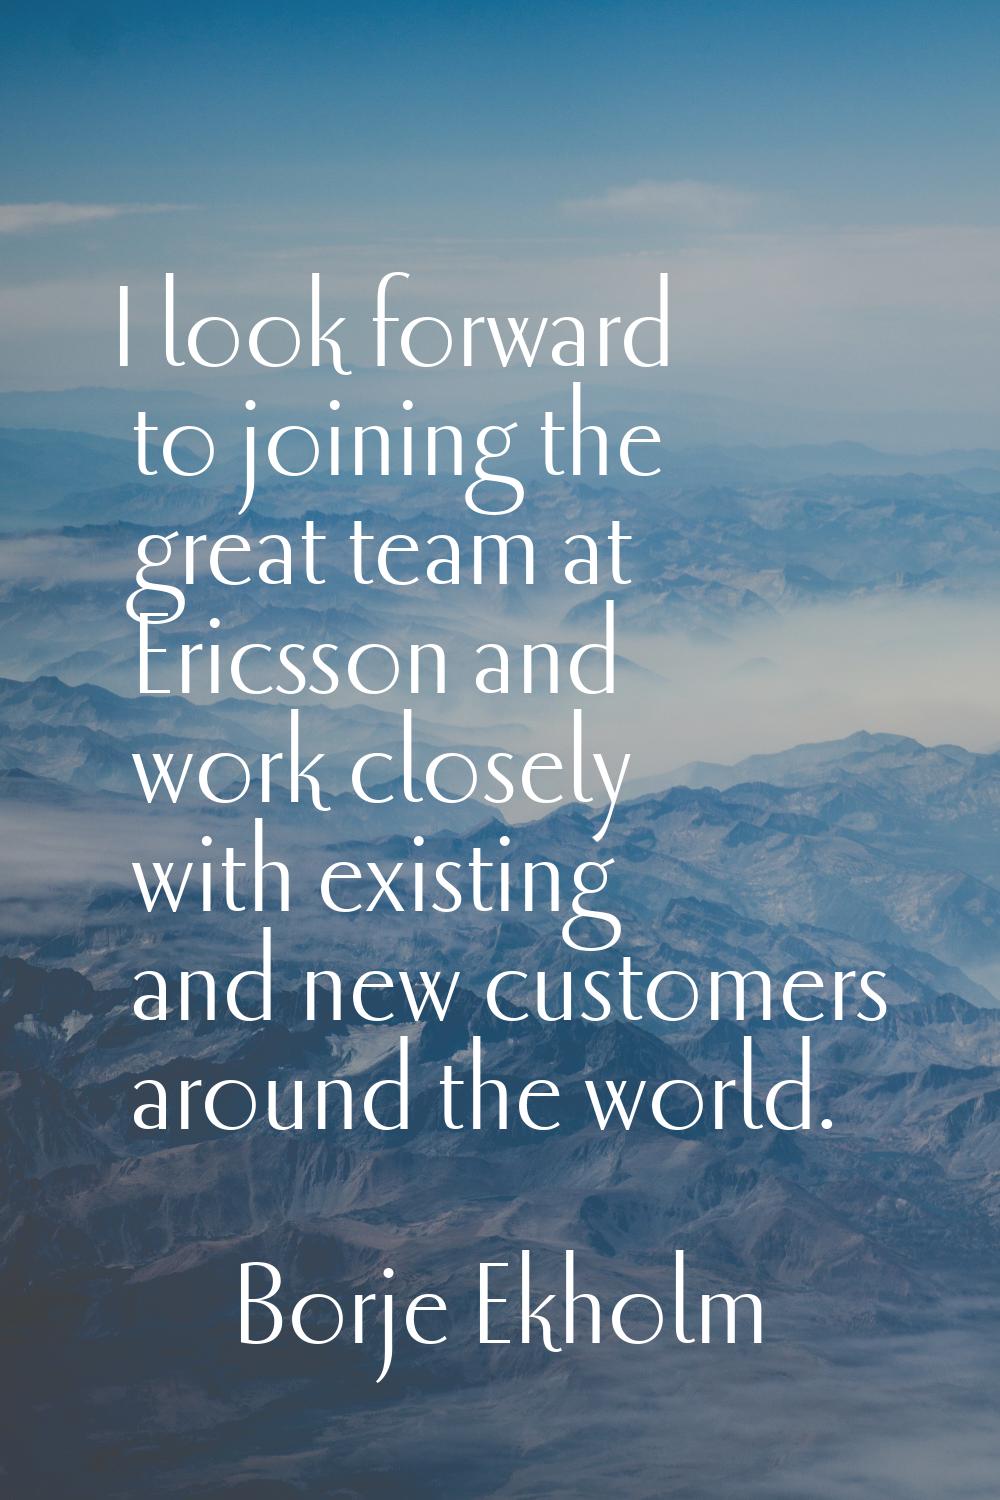 I look forward to joining the great team at Ericsson and work closely with existing and new custome